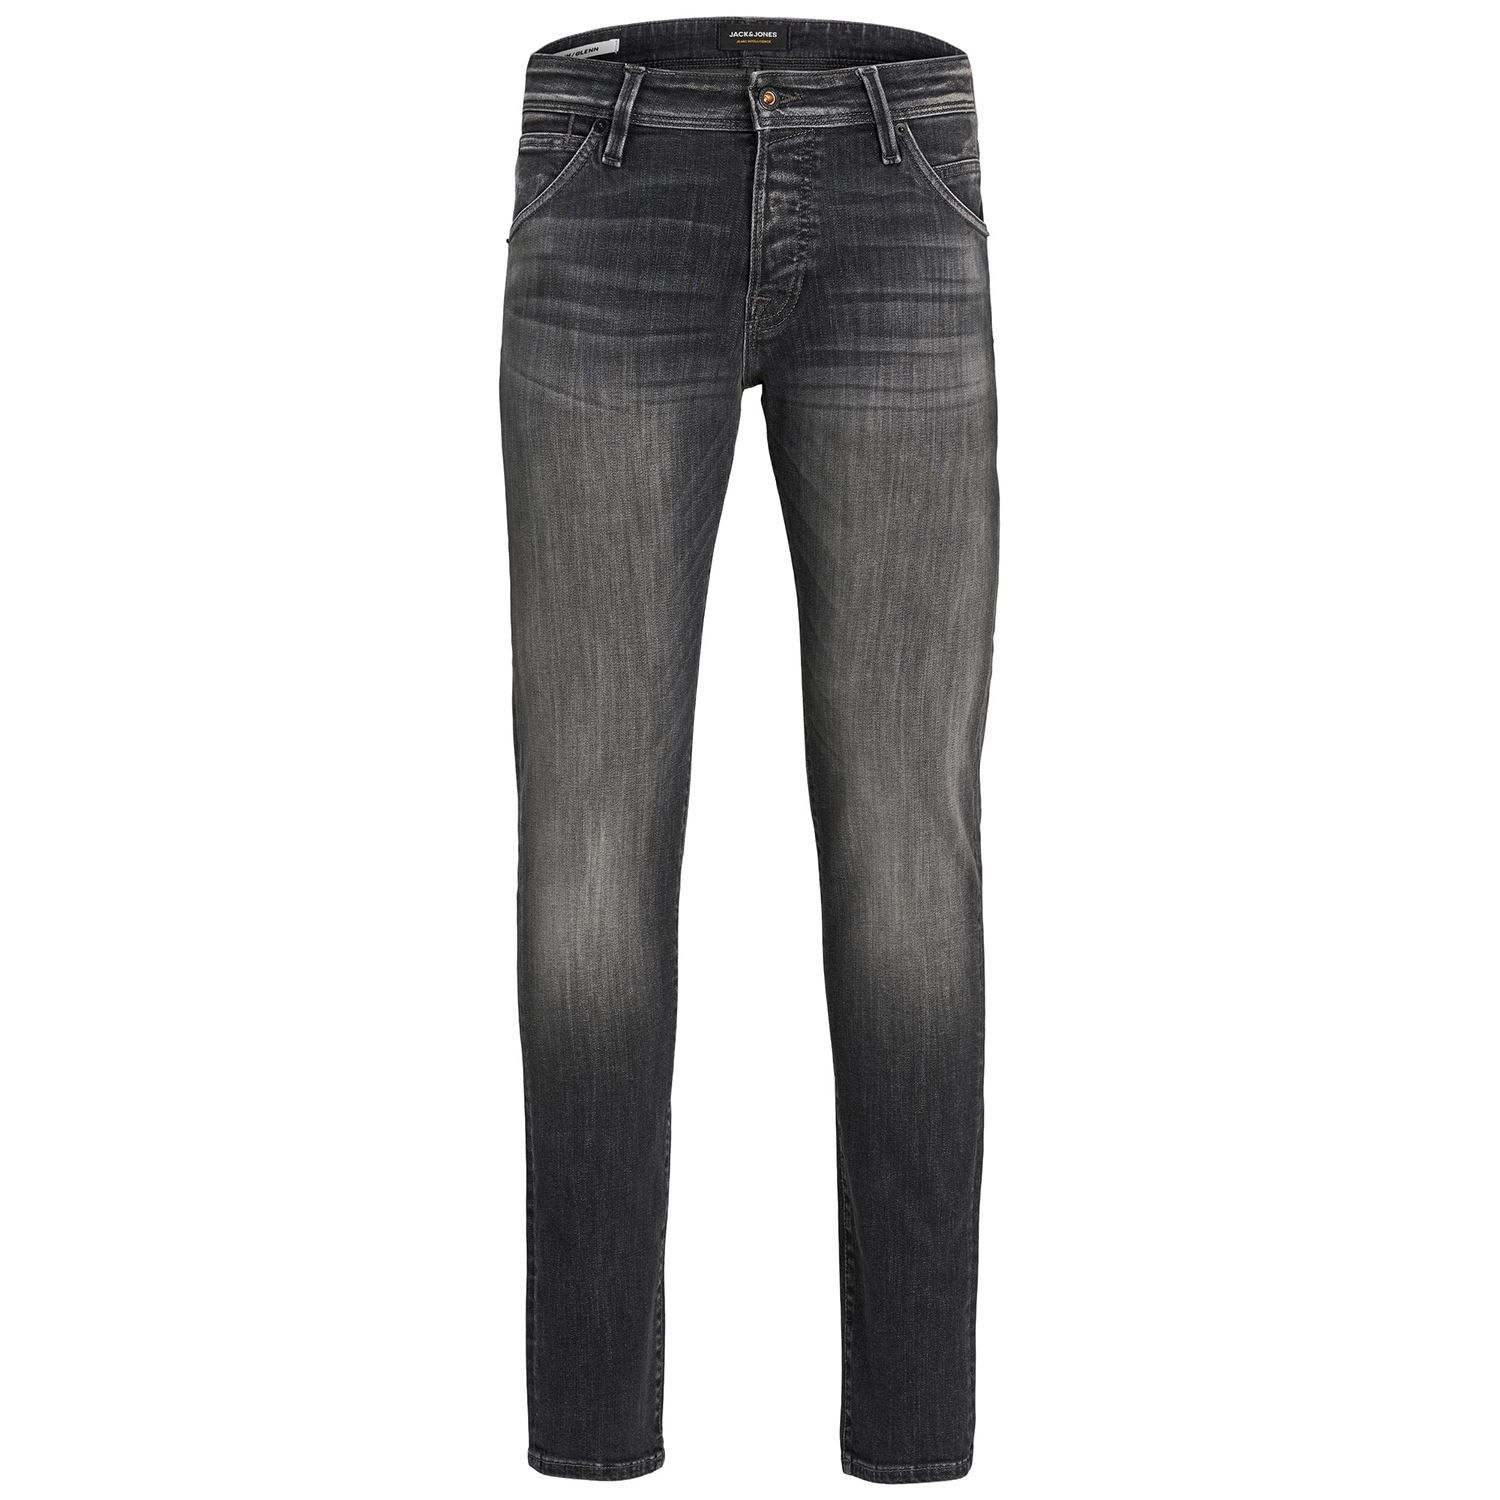 For that urban edge look, look no further than this pair of slim-fit biker jeans from Jack & Jones. High on street style edginess, make a statement in this pair teamed with a tee and cool biker jacket!

Slim Fit Glenn: Glenn is an updated slim fit with a tapered leg. The fit is narrow and leans through the thigh without feeling tight, and it always comes with stretch. Glenn is for the guy who likes his jeans slim, not skinny.
Fox Styling: Fox is the upbeat cousin to classic five-pocket jeans. It’s got all the familiar features, but the design and detailing is a little more playful; the front pockets are slanted, the back pockets are pointy, and it’s got a square rivet on the coin pocket.
Super Stretch 50%: Super Stretch is denim that stretches 1.5 times its actual size. The high amount of stretch makes it a comfortable experience to wear skin-tight jeans. And you don’t have to worry about jeans that get saggy once you’ve worn them a few times. The special yarn spun from a unique mix of cotton, polyester, and elastane gets rid of that concern.

Features:
Slim-fit for a sleek, modern silhouette
Five-pocket jeans with cutting-edge styling
Button fly
Super Stretch 50% stretches 1.5x its actual size

Specifics:
Material: 91% Cotton, 7% Polyester, 2% Elastane
Product Code: 12175890

Washing Instruction:
Machine wash at 30°C
Tumble dry on low heat settings

Iron Temp: On medium heat setting

Note: Do not bleach, Dry clean (no trichloroethylene)

Package Includes: Jack&Jones Glenn Fox Slim Fit Jeans (Black Denim) Select your Size